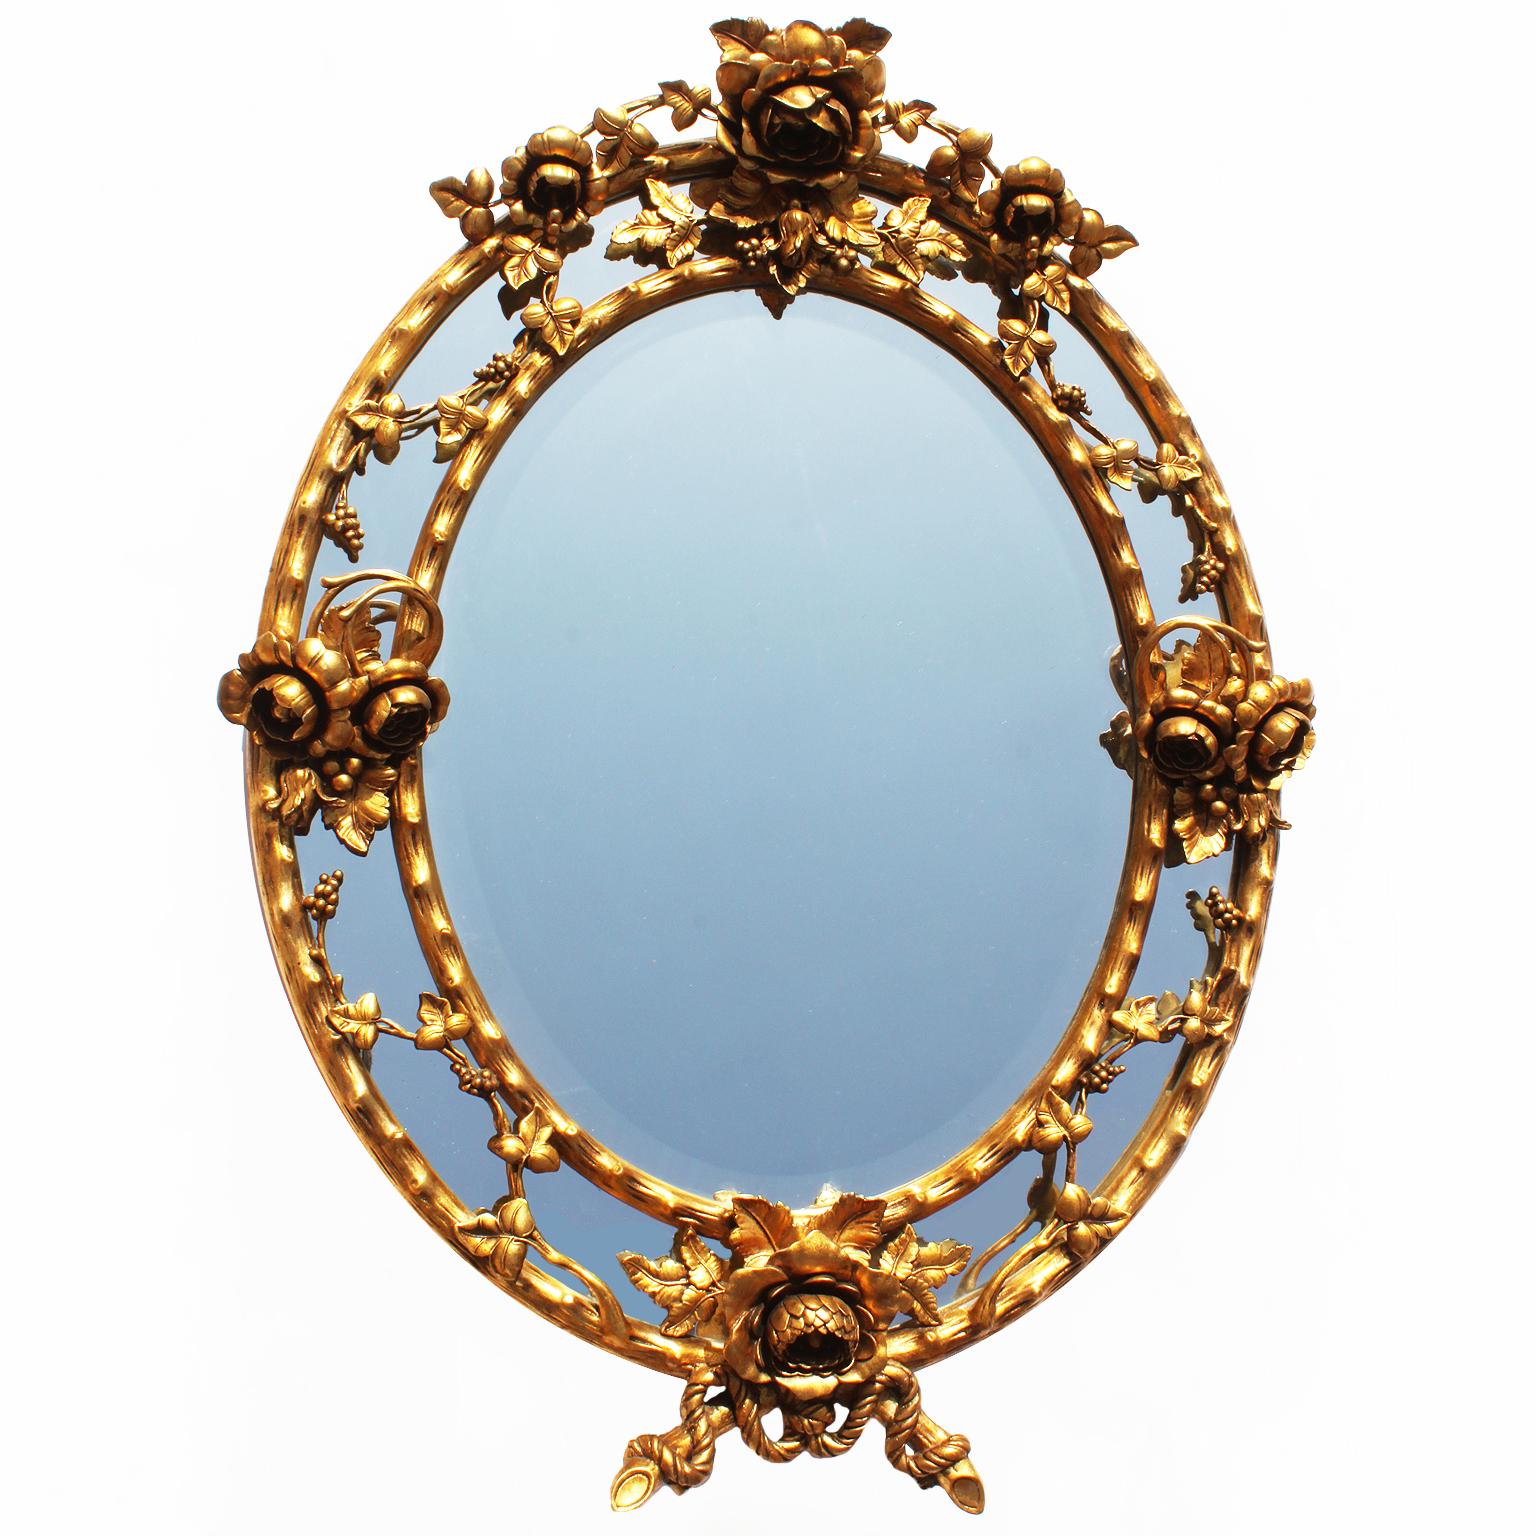 A fine pair of French Belle Époque giltwood and gesso carved oval mirror frames. The ornately carved frames, each topped with a flower bouquet among leaves and grape vines, the body of the frame resembling a tree branch, flanked on each side with a